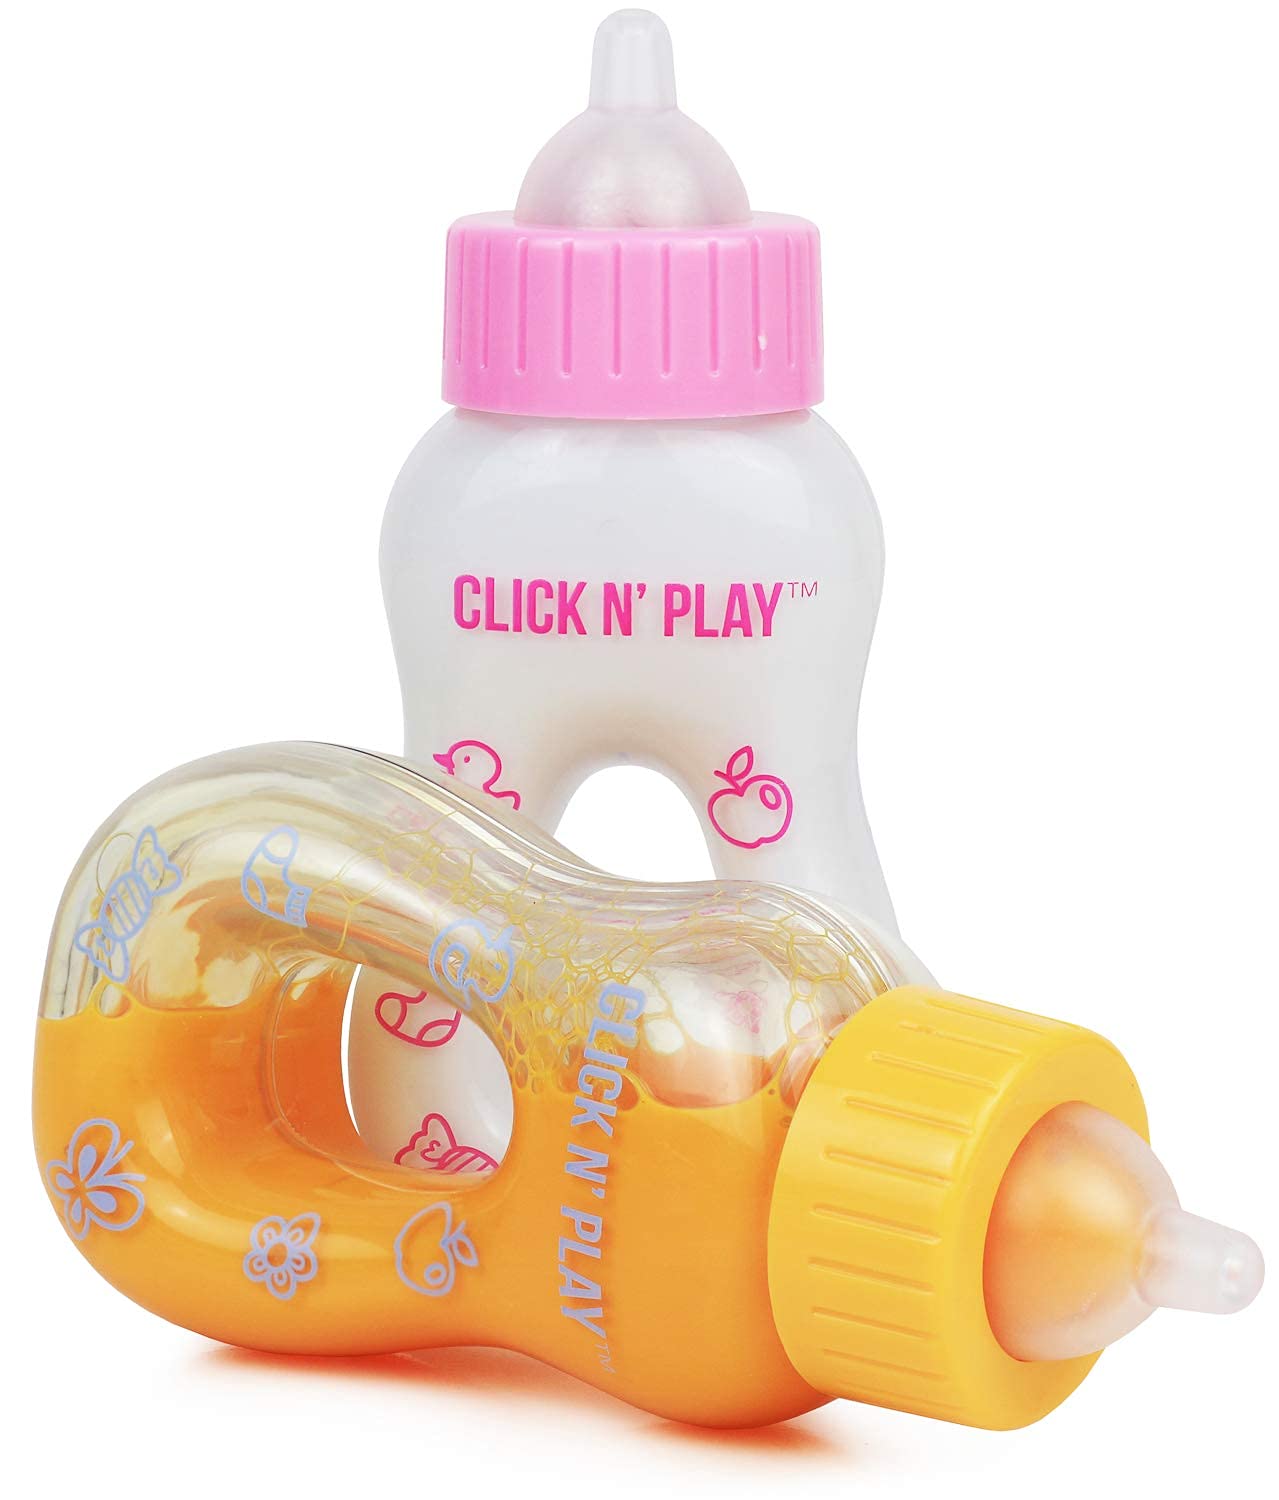 Click N' Play Magic Toy Set, Play Baby Bottles with Disappearing Milk & Juice, Doll Accessories for Kids & Toddlers, Great Gift for Little Girls Ages 2-4